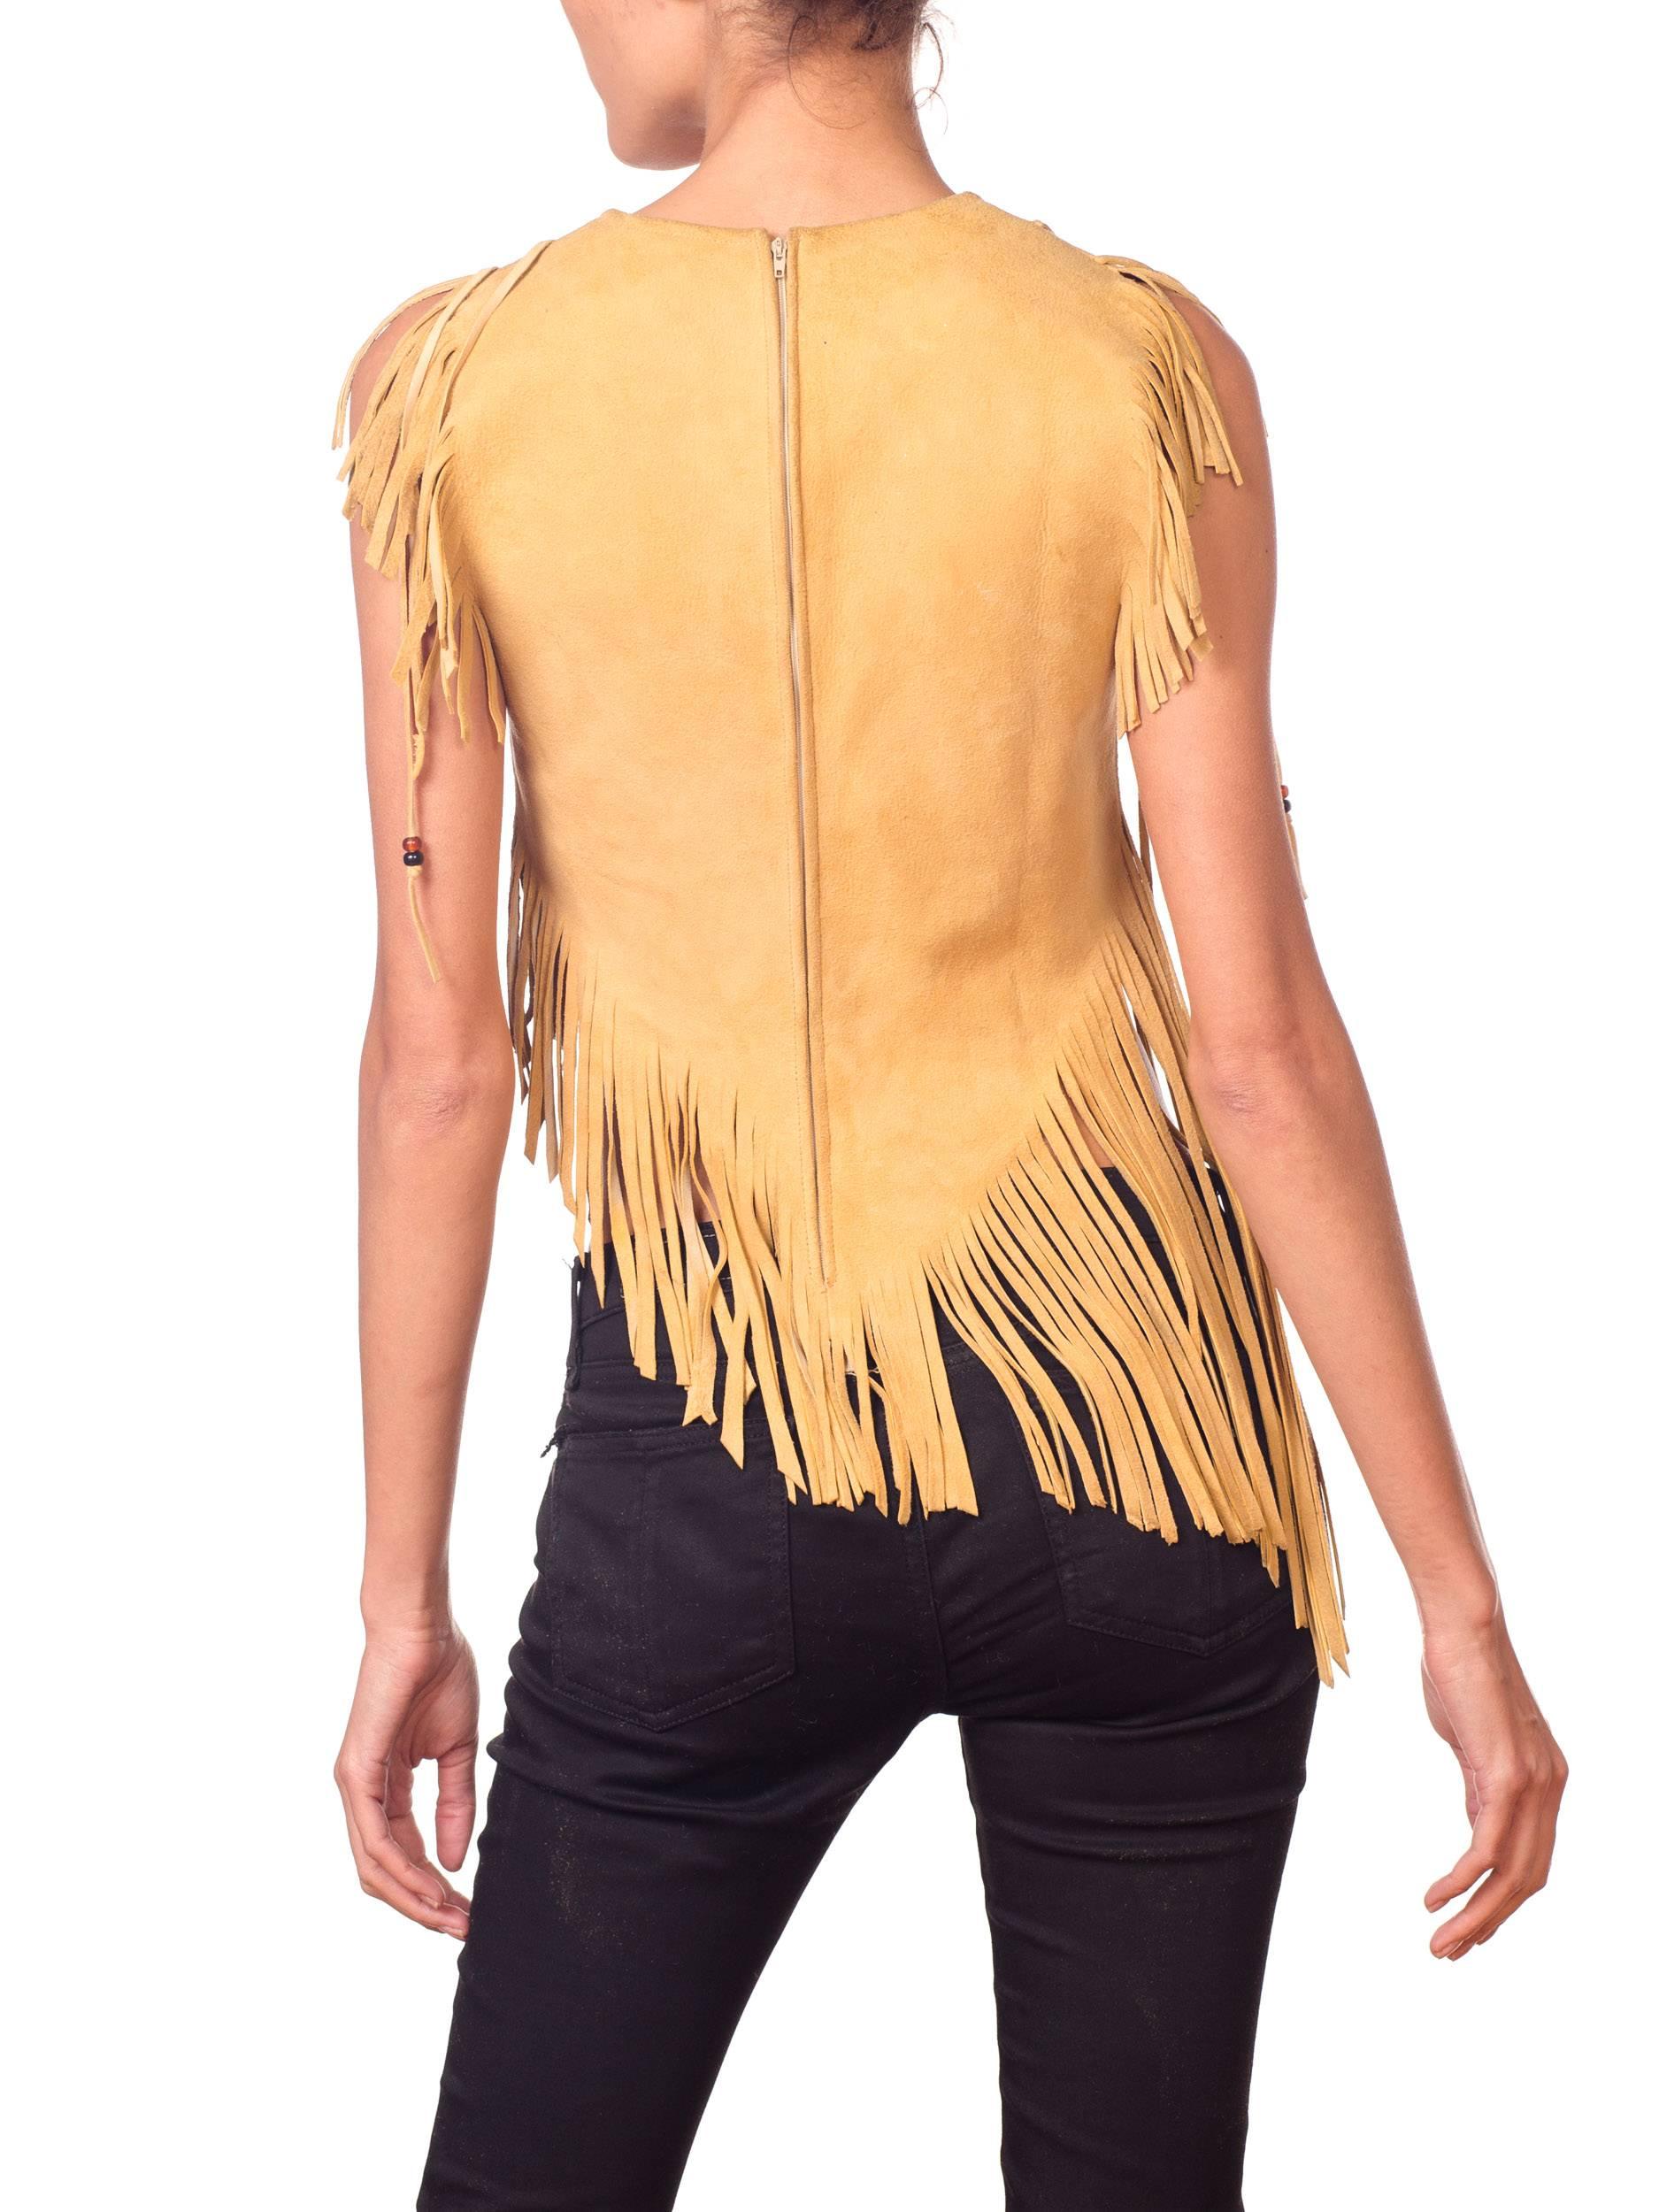 Orange 70s Leather Fringe Crop Top with Beads